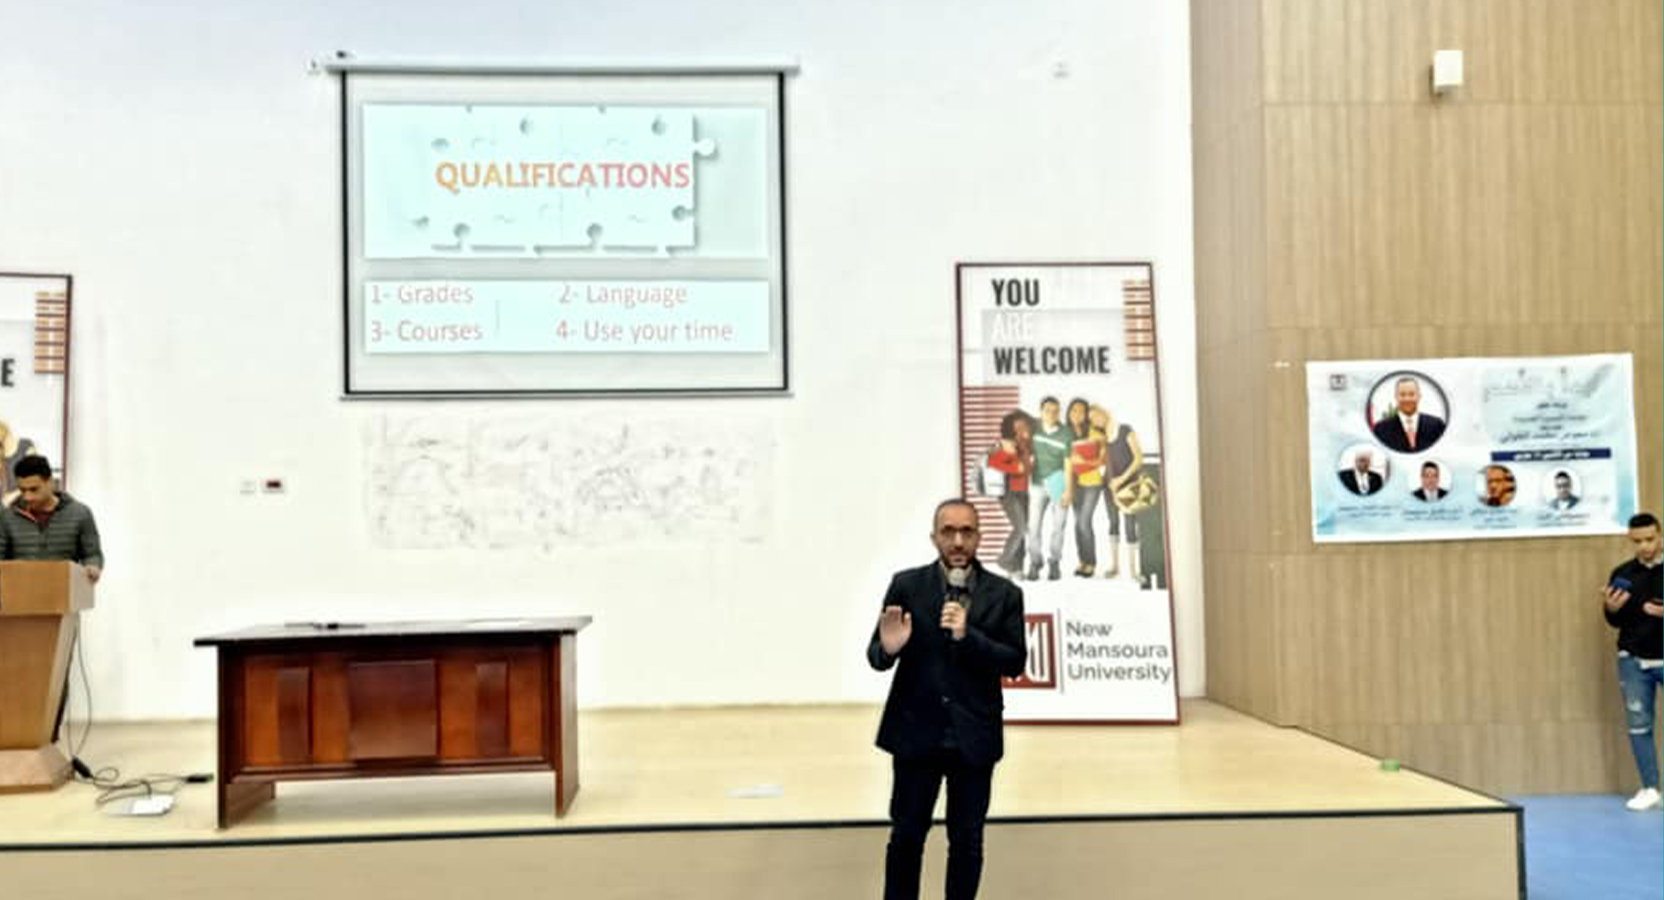 How to qualify yourself for a workshop at New Mansoura University